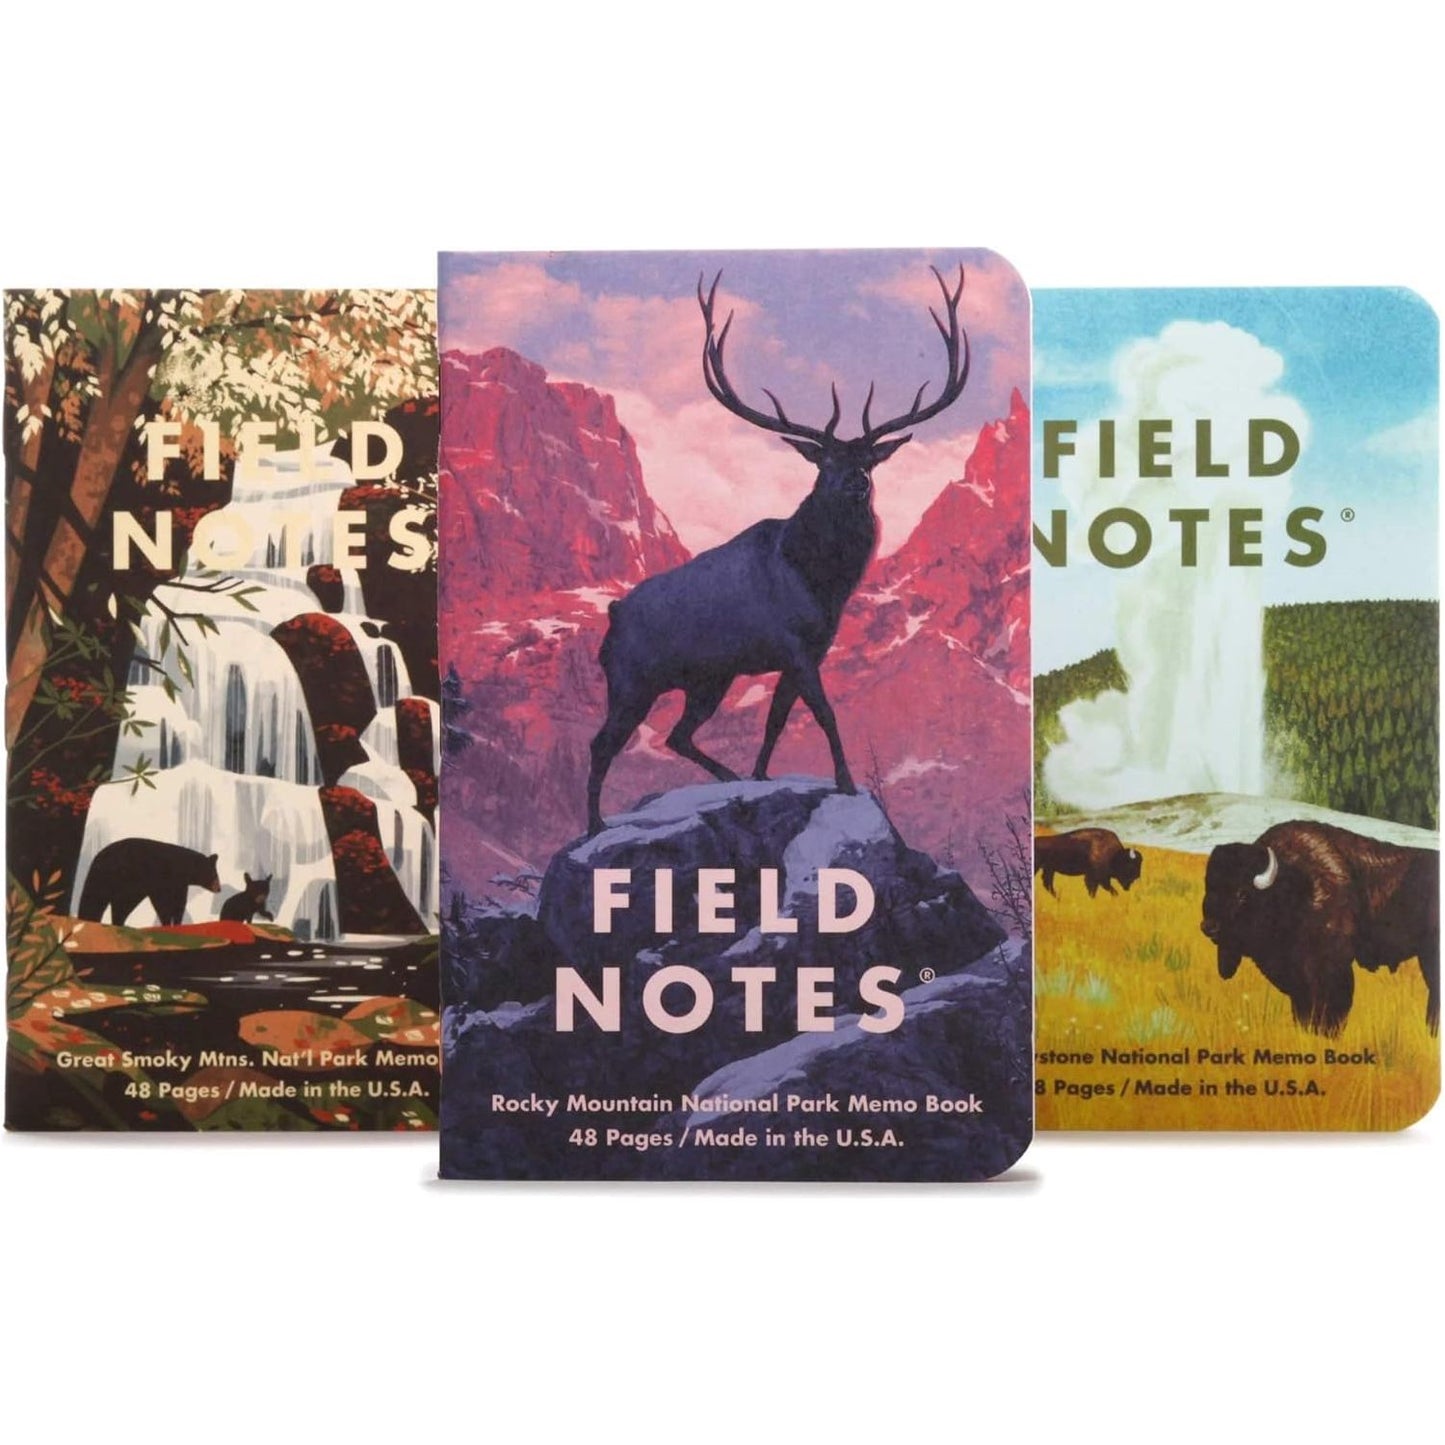 National Parks Graph Paper Memo Book 3-Pack (Series A - Yosemite, Acadia, Zion)